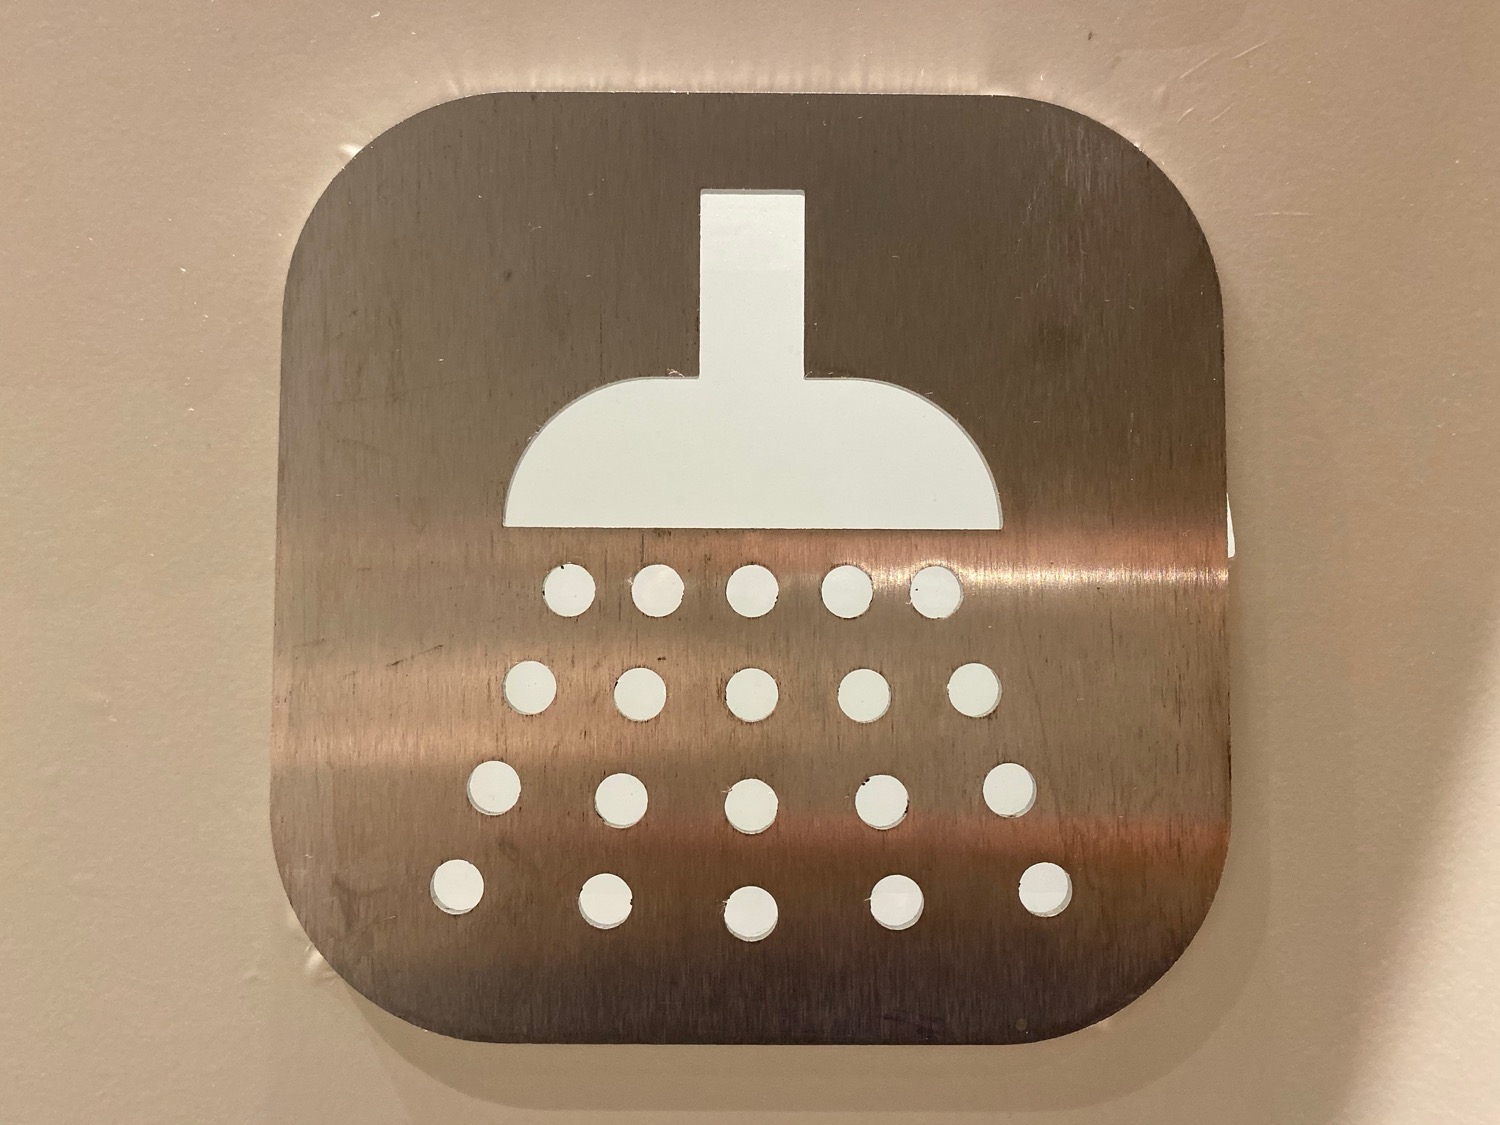 a metal sign with a shower head cut out